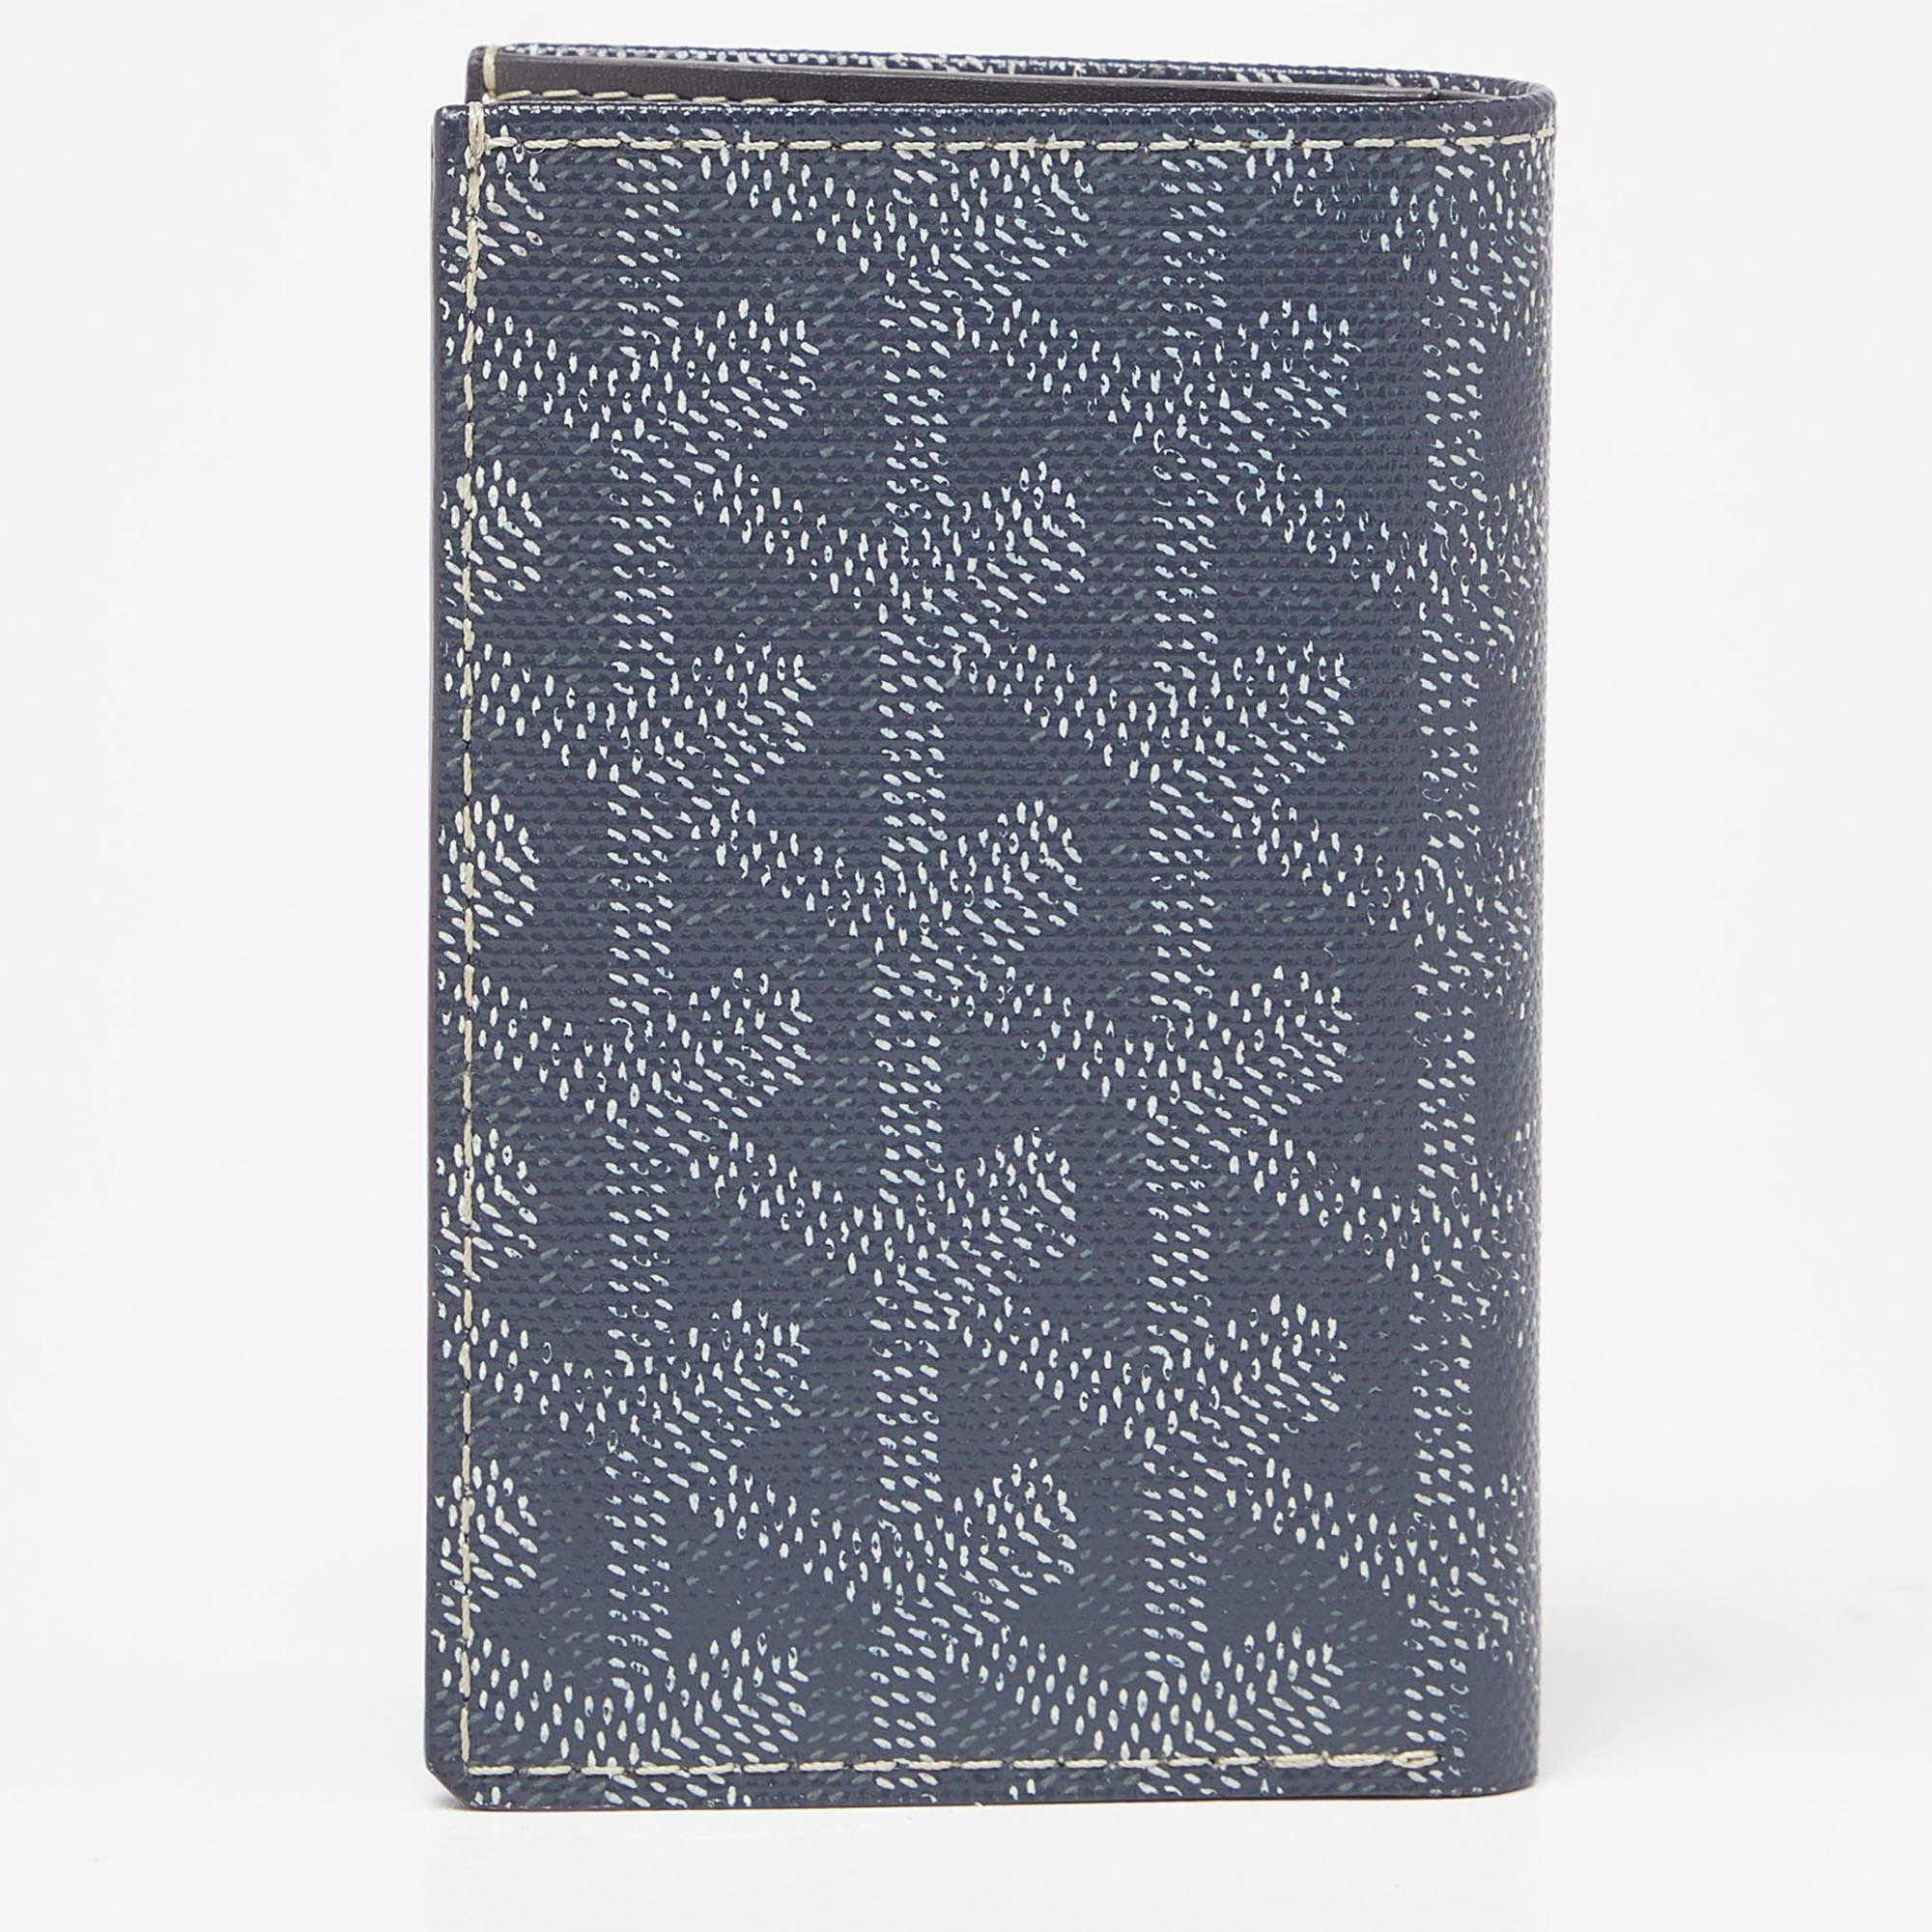 Functional and stylish, this St. Marc cardholder from Goyard is your next best buy. Crafted from the signature Goyardine coated canvas, this grey card holder features a bifold silhouette, multiple card slots, the brand's logo embossed on the front